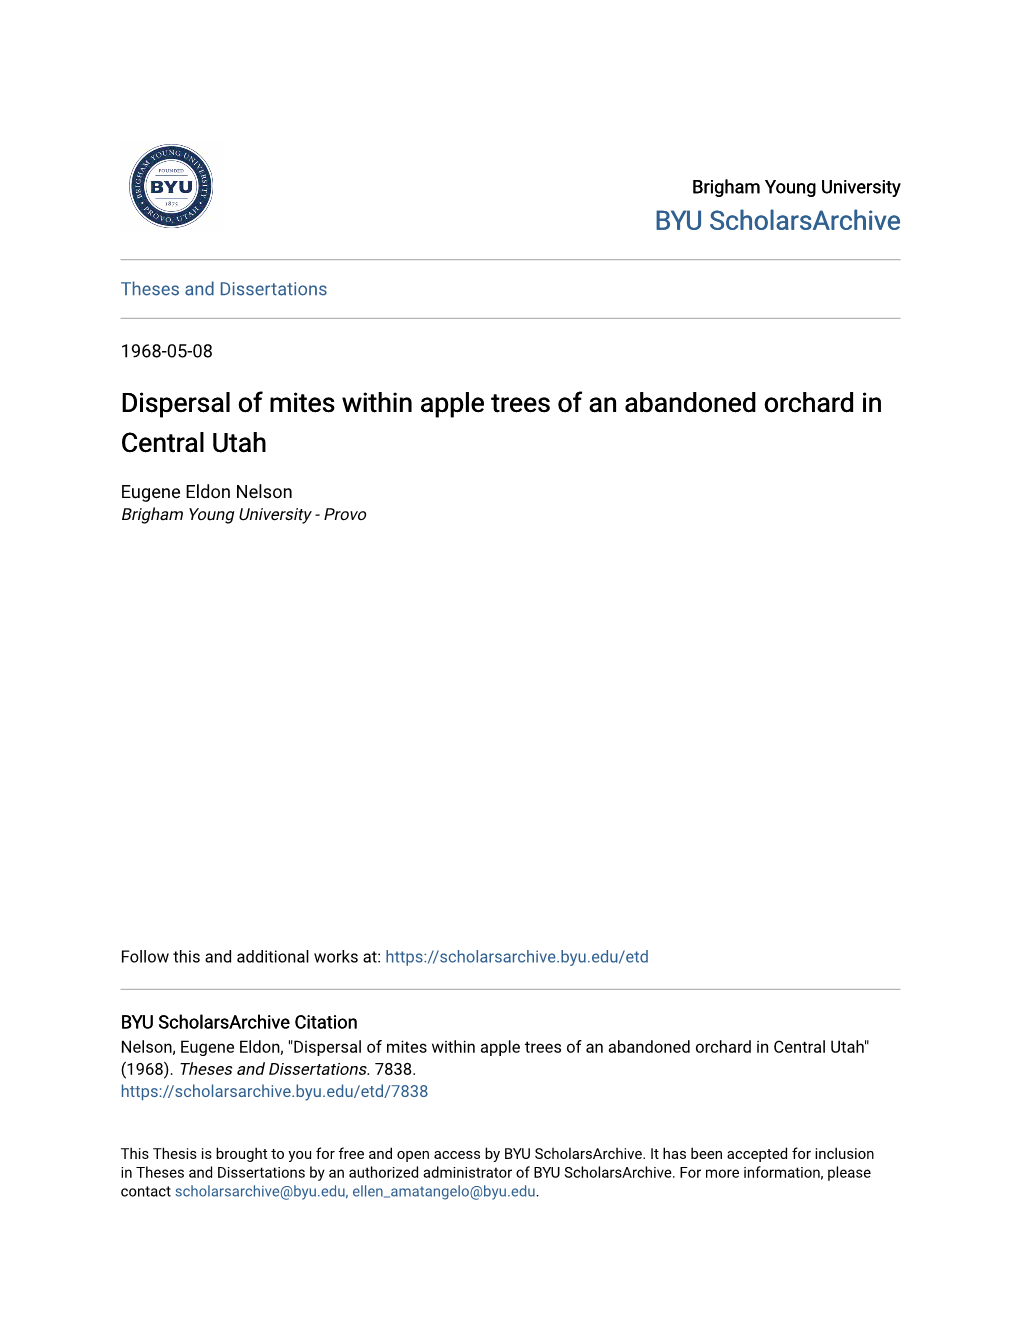 Dispersal of Mites Within Apple Trees of an Abandoned Orchard in Central Utah